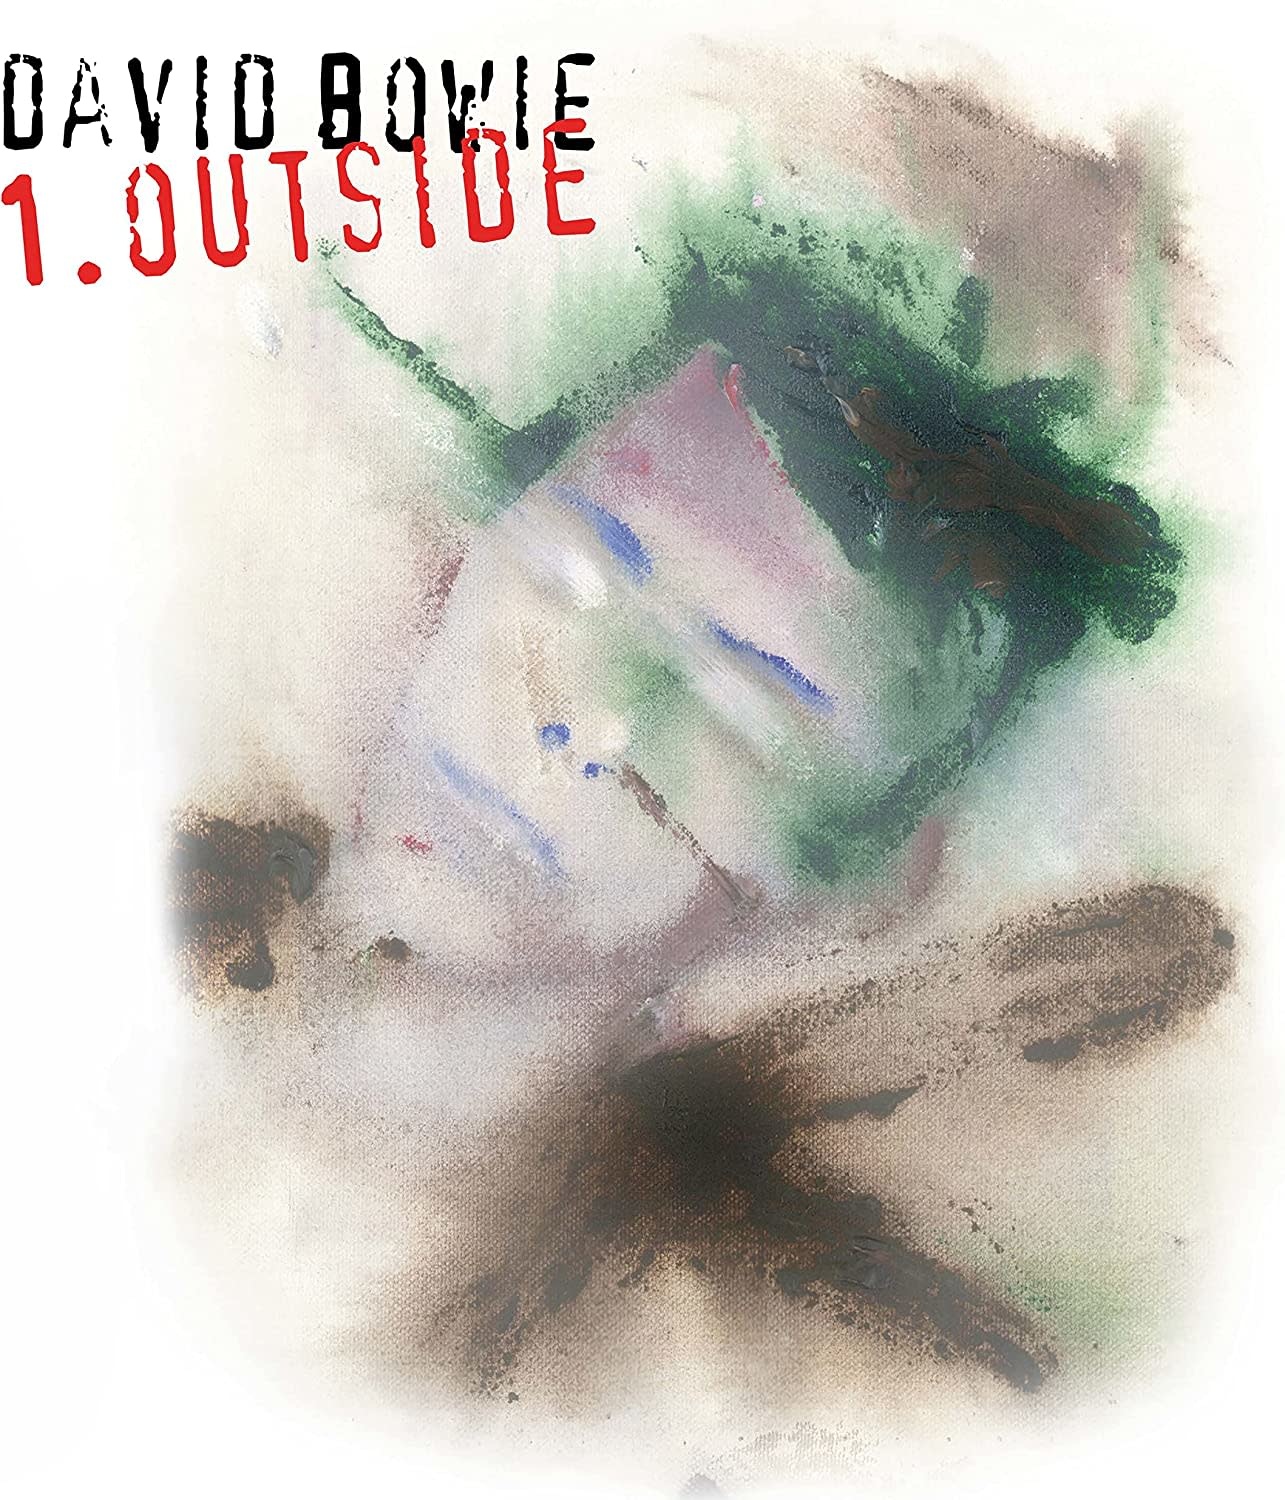 David Bowie – 1. Outside (The Nathan Adler Diaries: A Hyper Cycle)